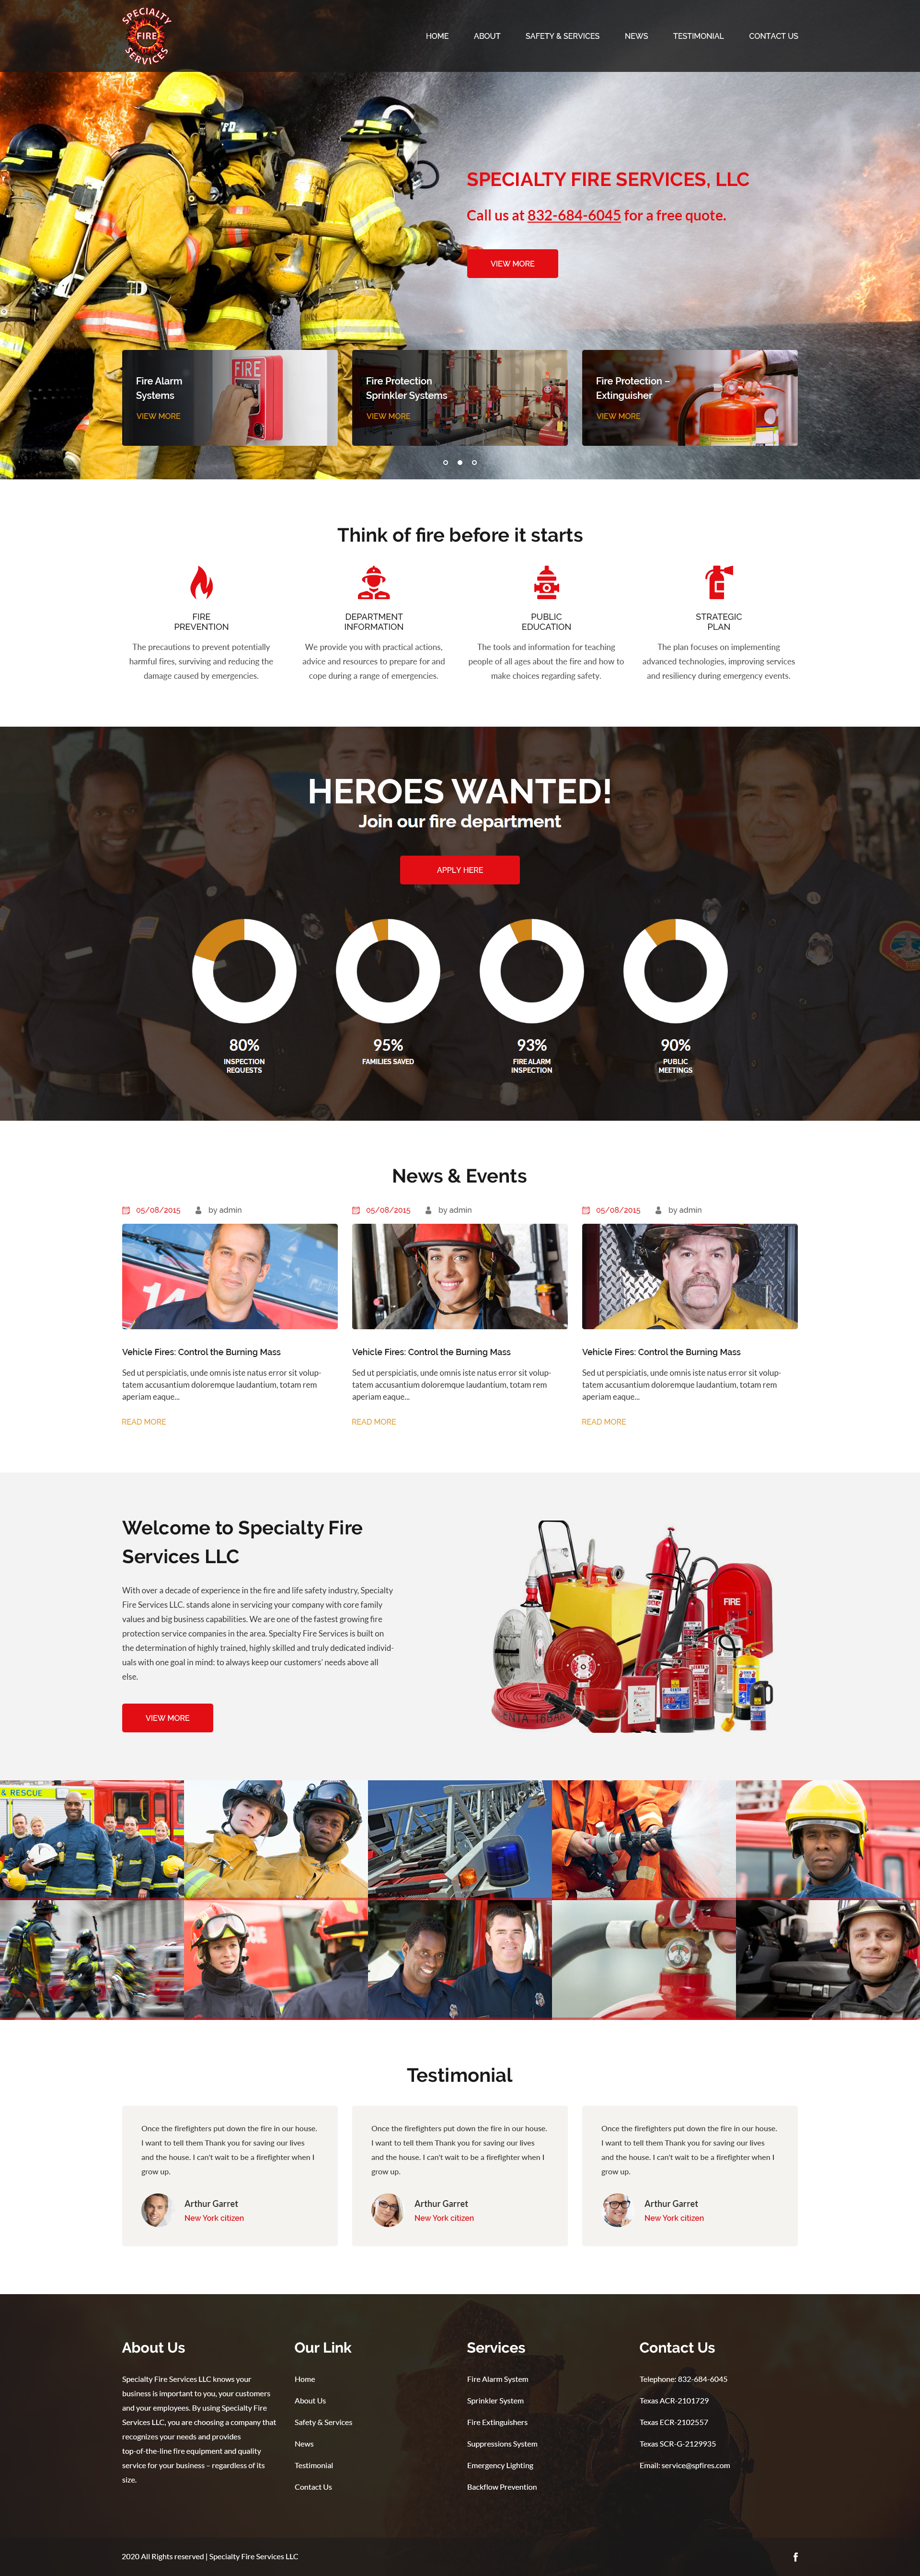 Specialty-Fire-Services_1